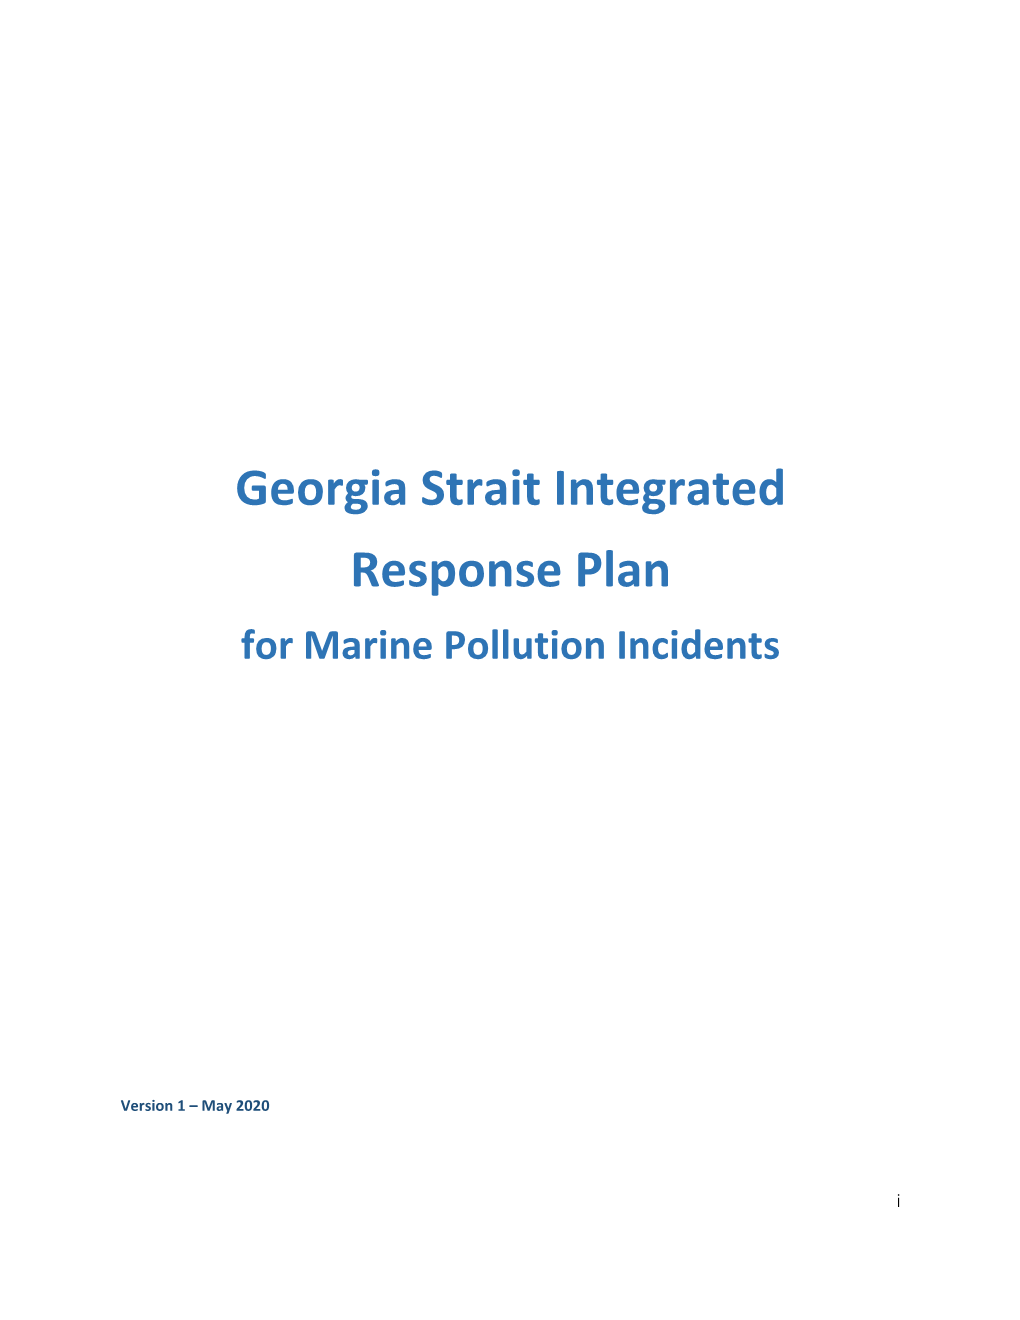 Georgia Strait Integrated Response Plan for Marine Pollution Incidents